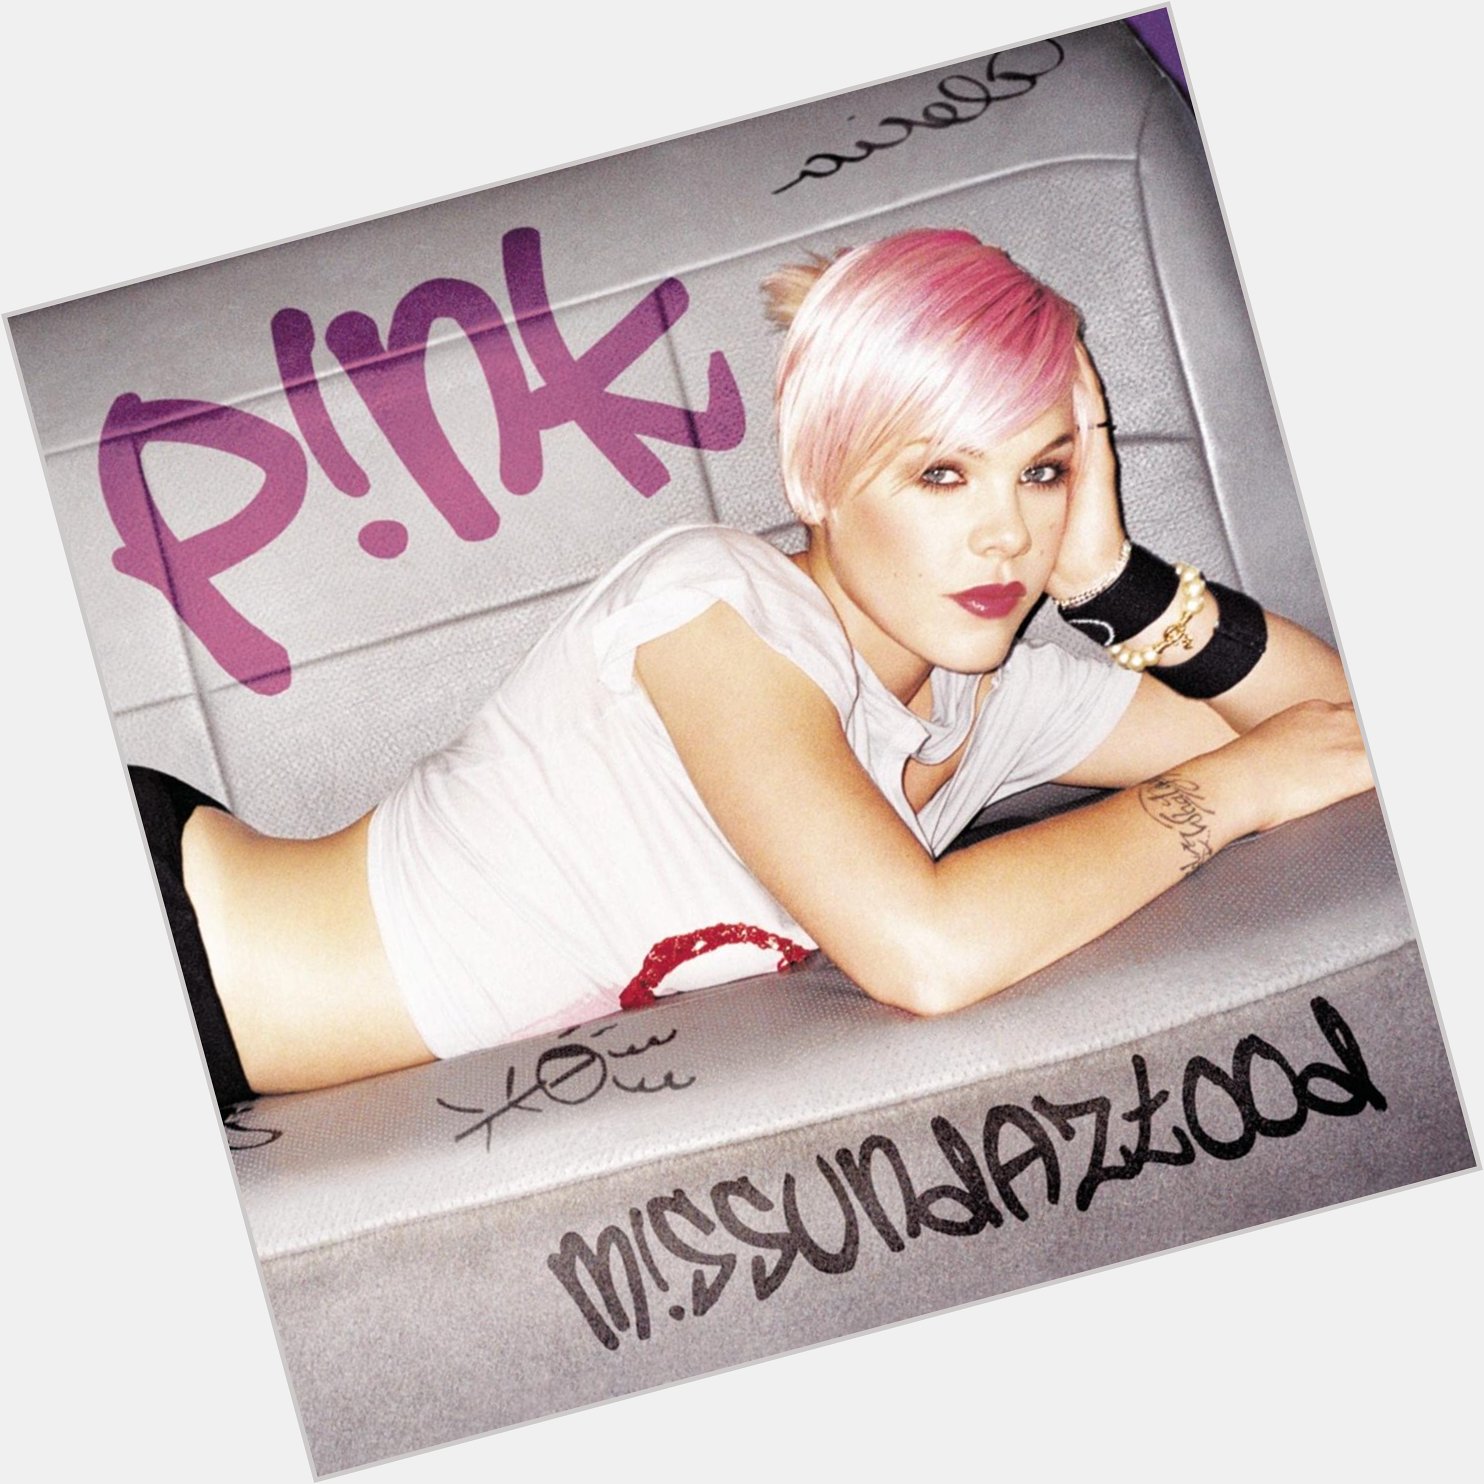  \Just Like a Pill\ by P!NK on Wishing her a Happy (belated) Birthday for Sept 8th! 